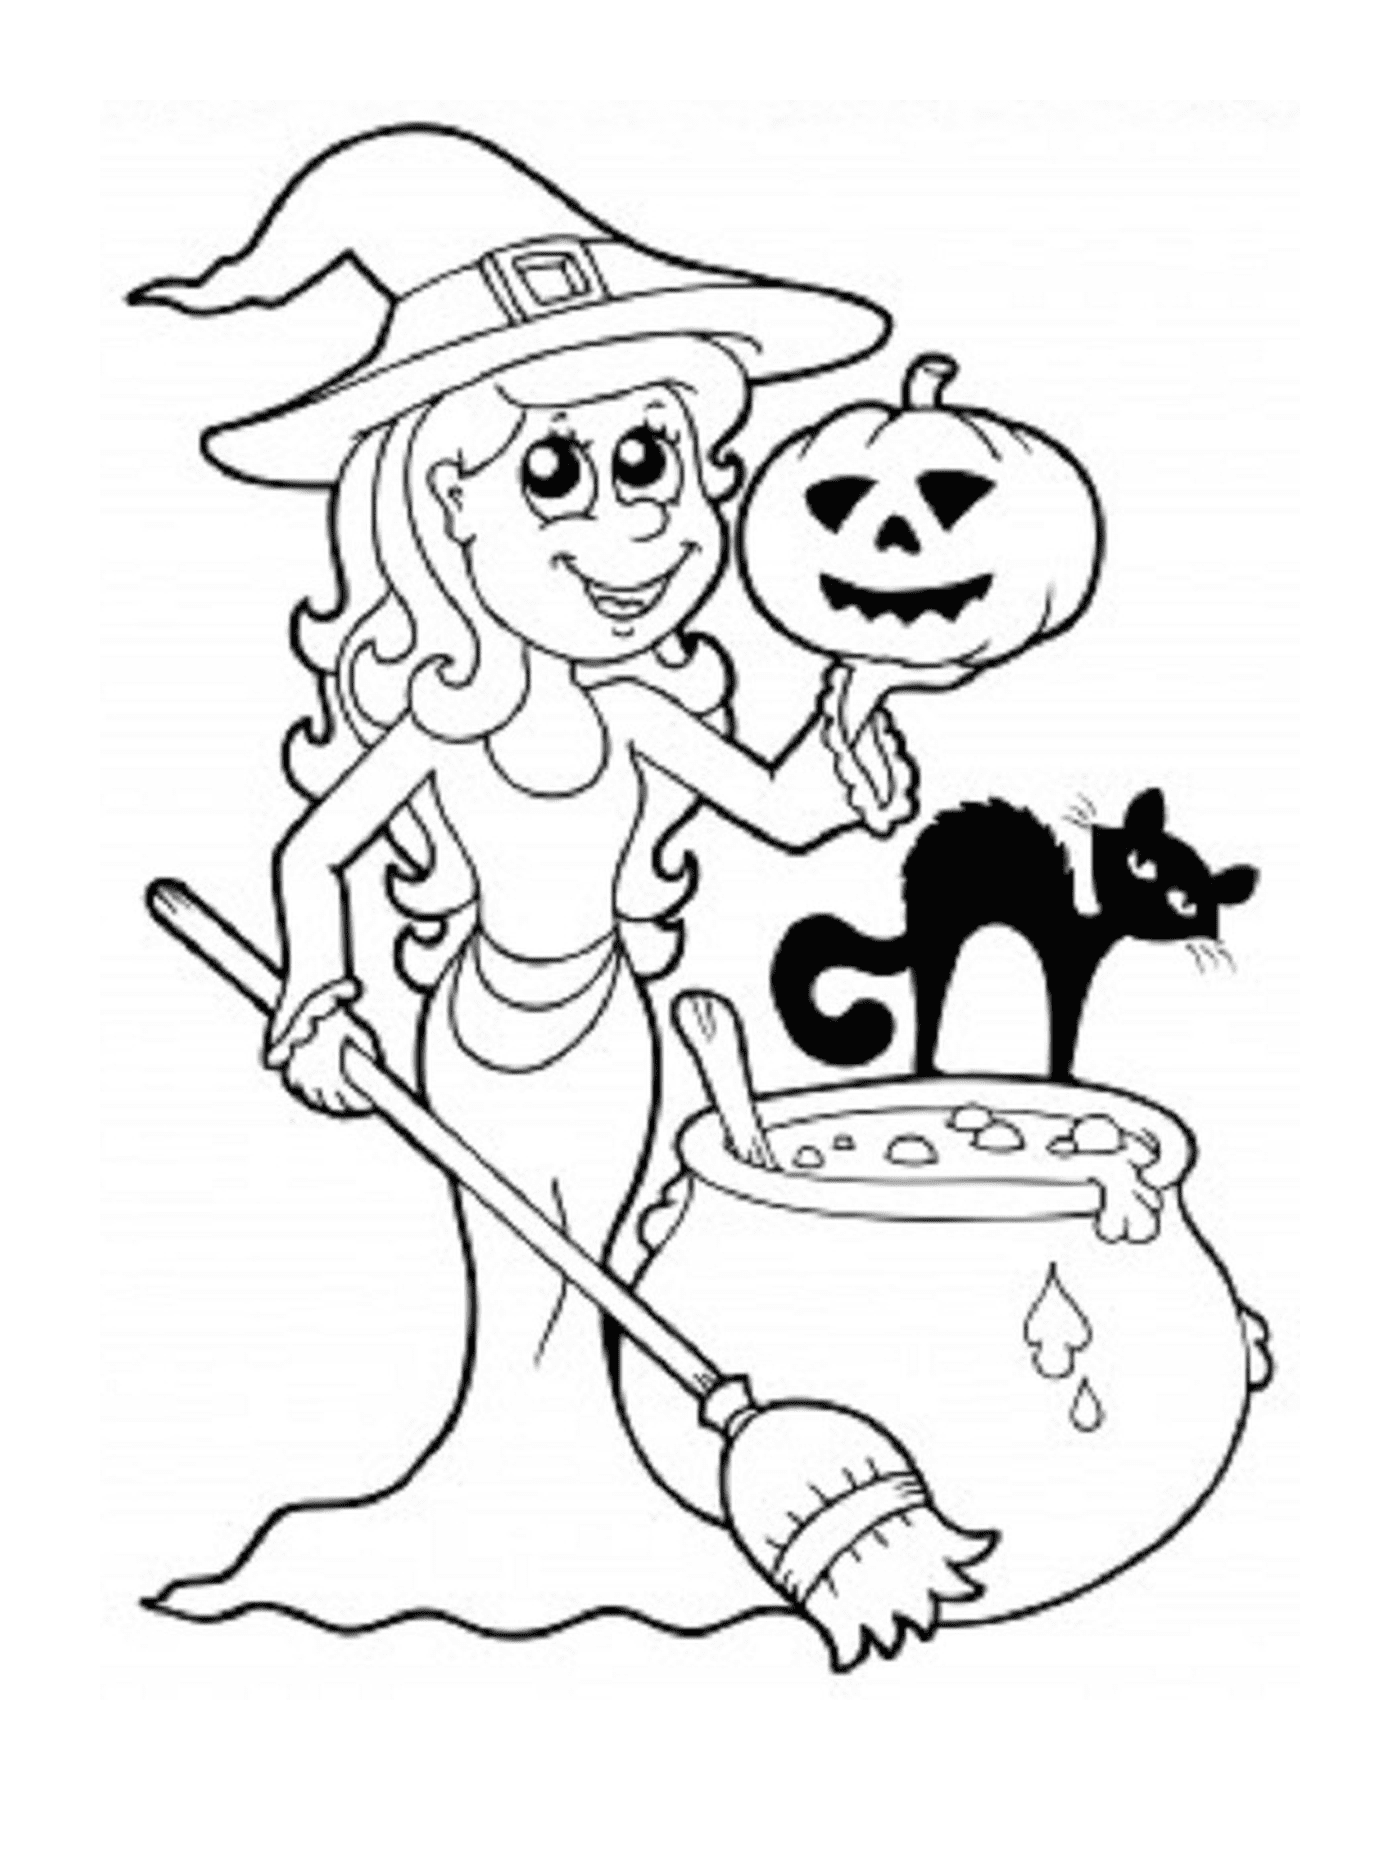  woman in witch costume holding a broom 